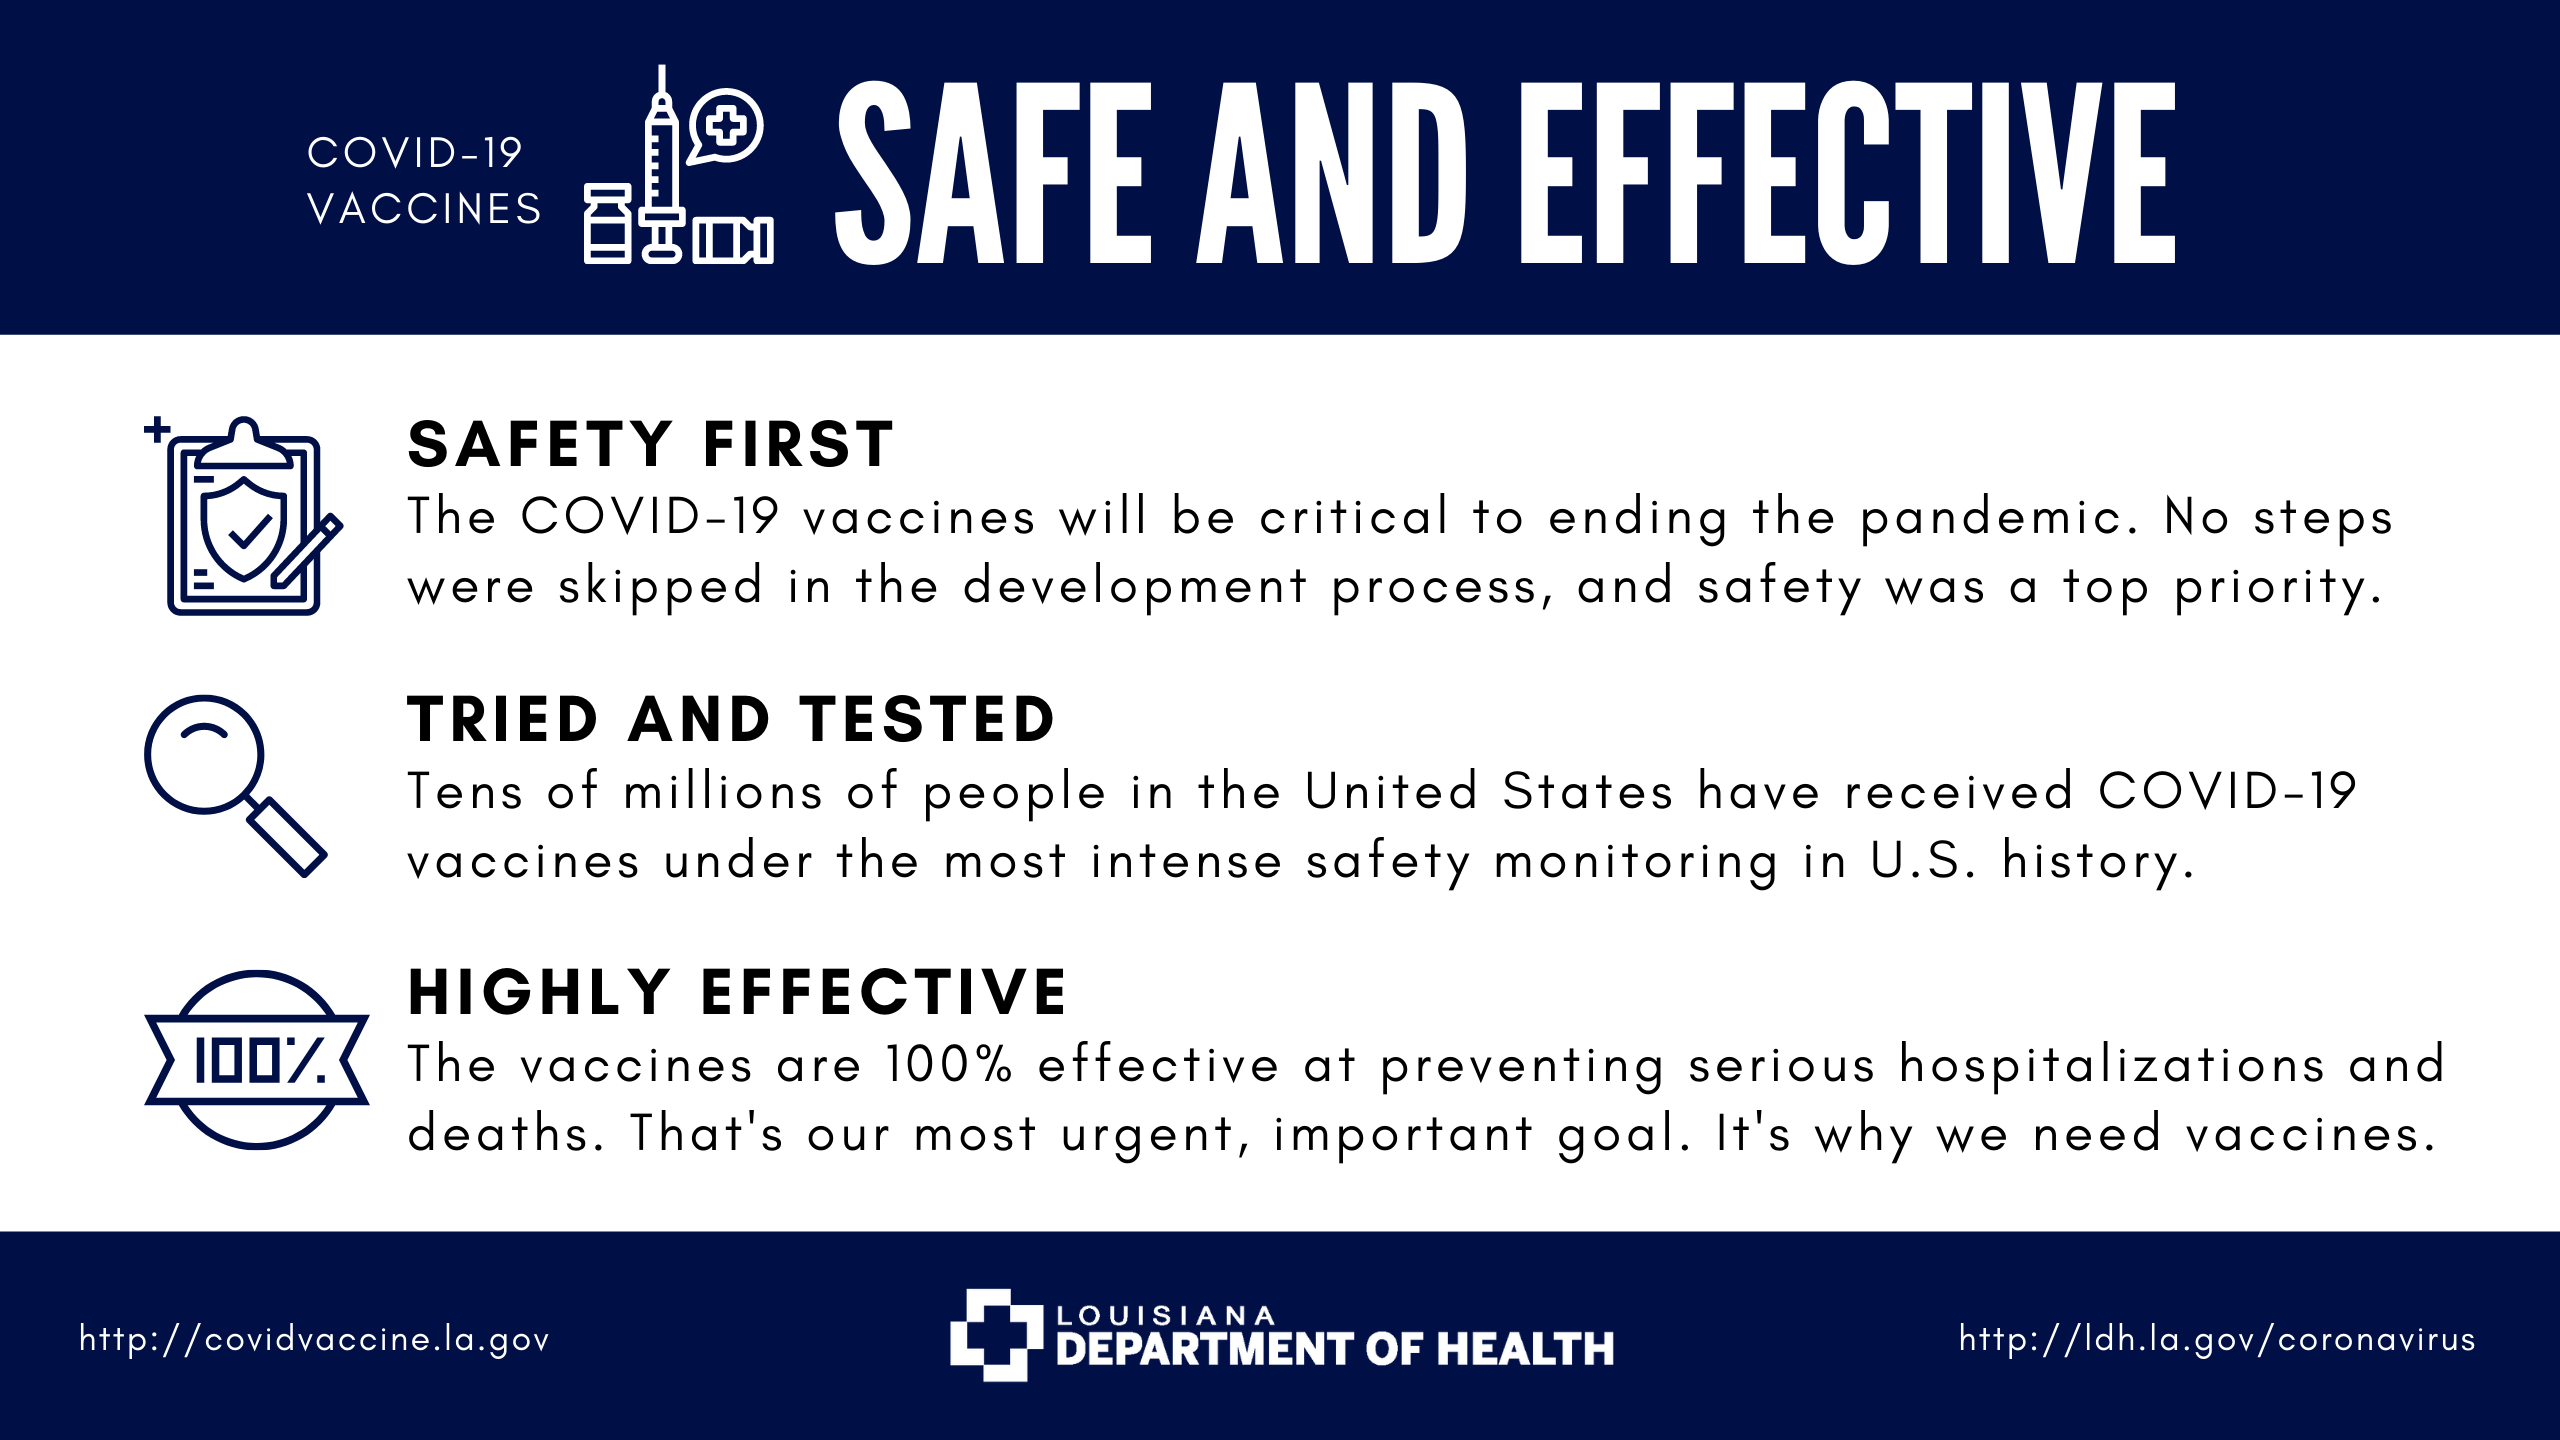 COVID-19 vaccines are safe and effective, they will be critical to ending the pandemic. No steps were skipped in the development process, and safety was a top priority. Tens of millions of people in the United States have recieved COVID-19 vaccines under the most intense safety monitoring in US history. The vaccines are 100% effective at preventing serious hospitalizations and deaths. That's our most urgent, important goal. It's why we need vaccines.